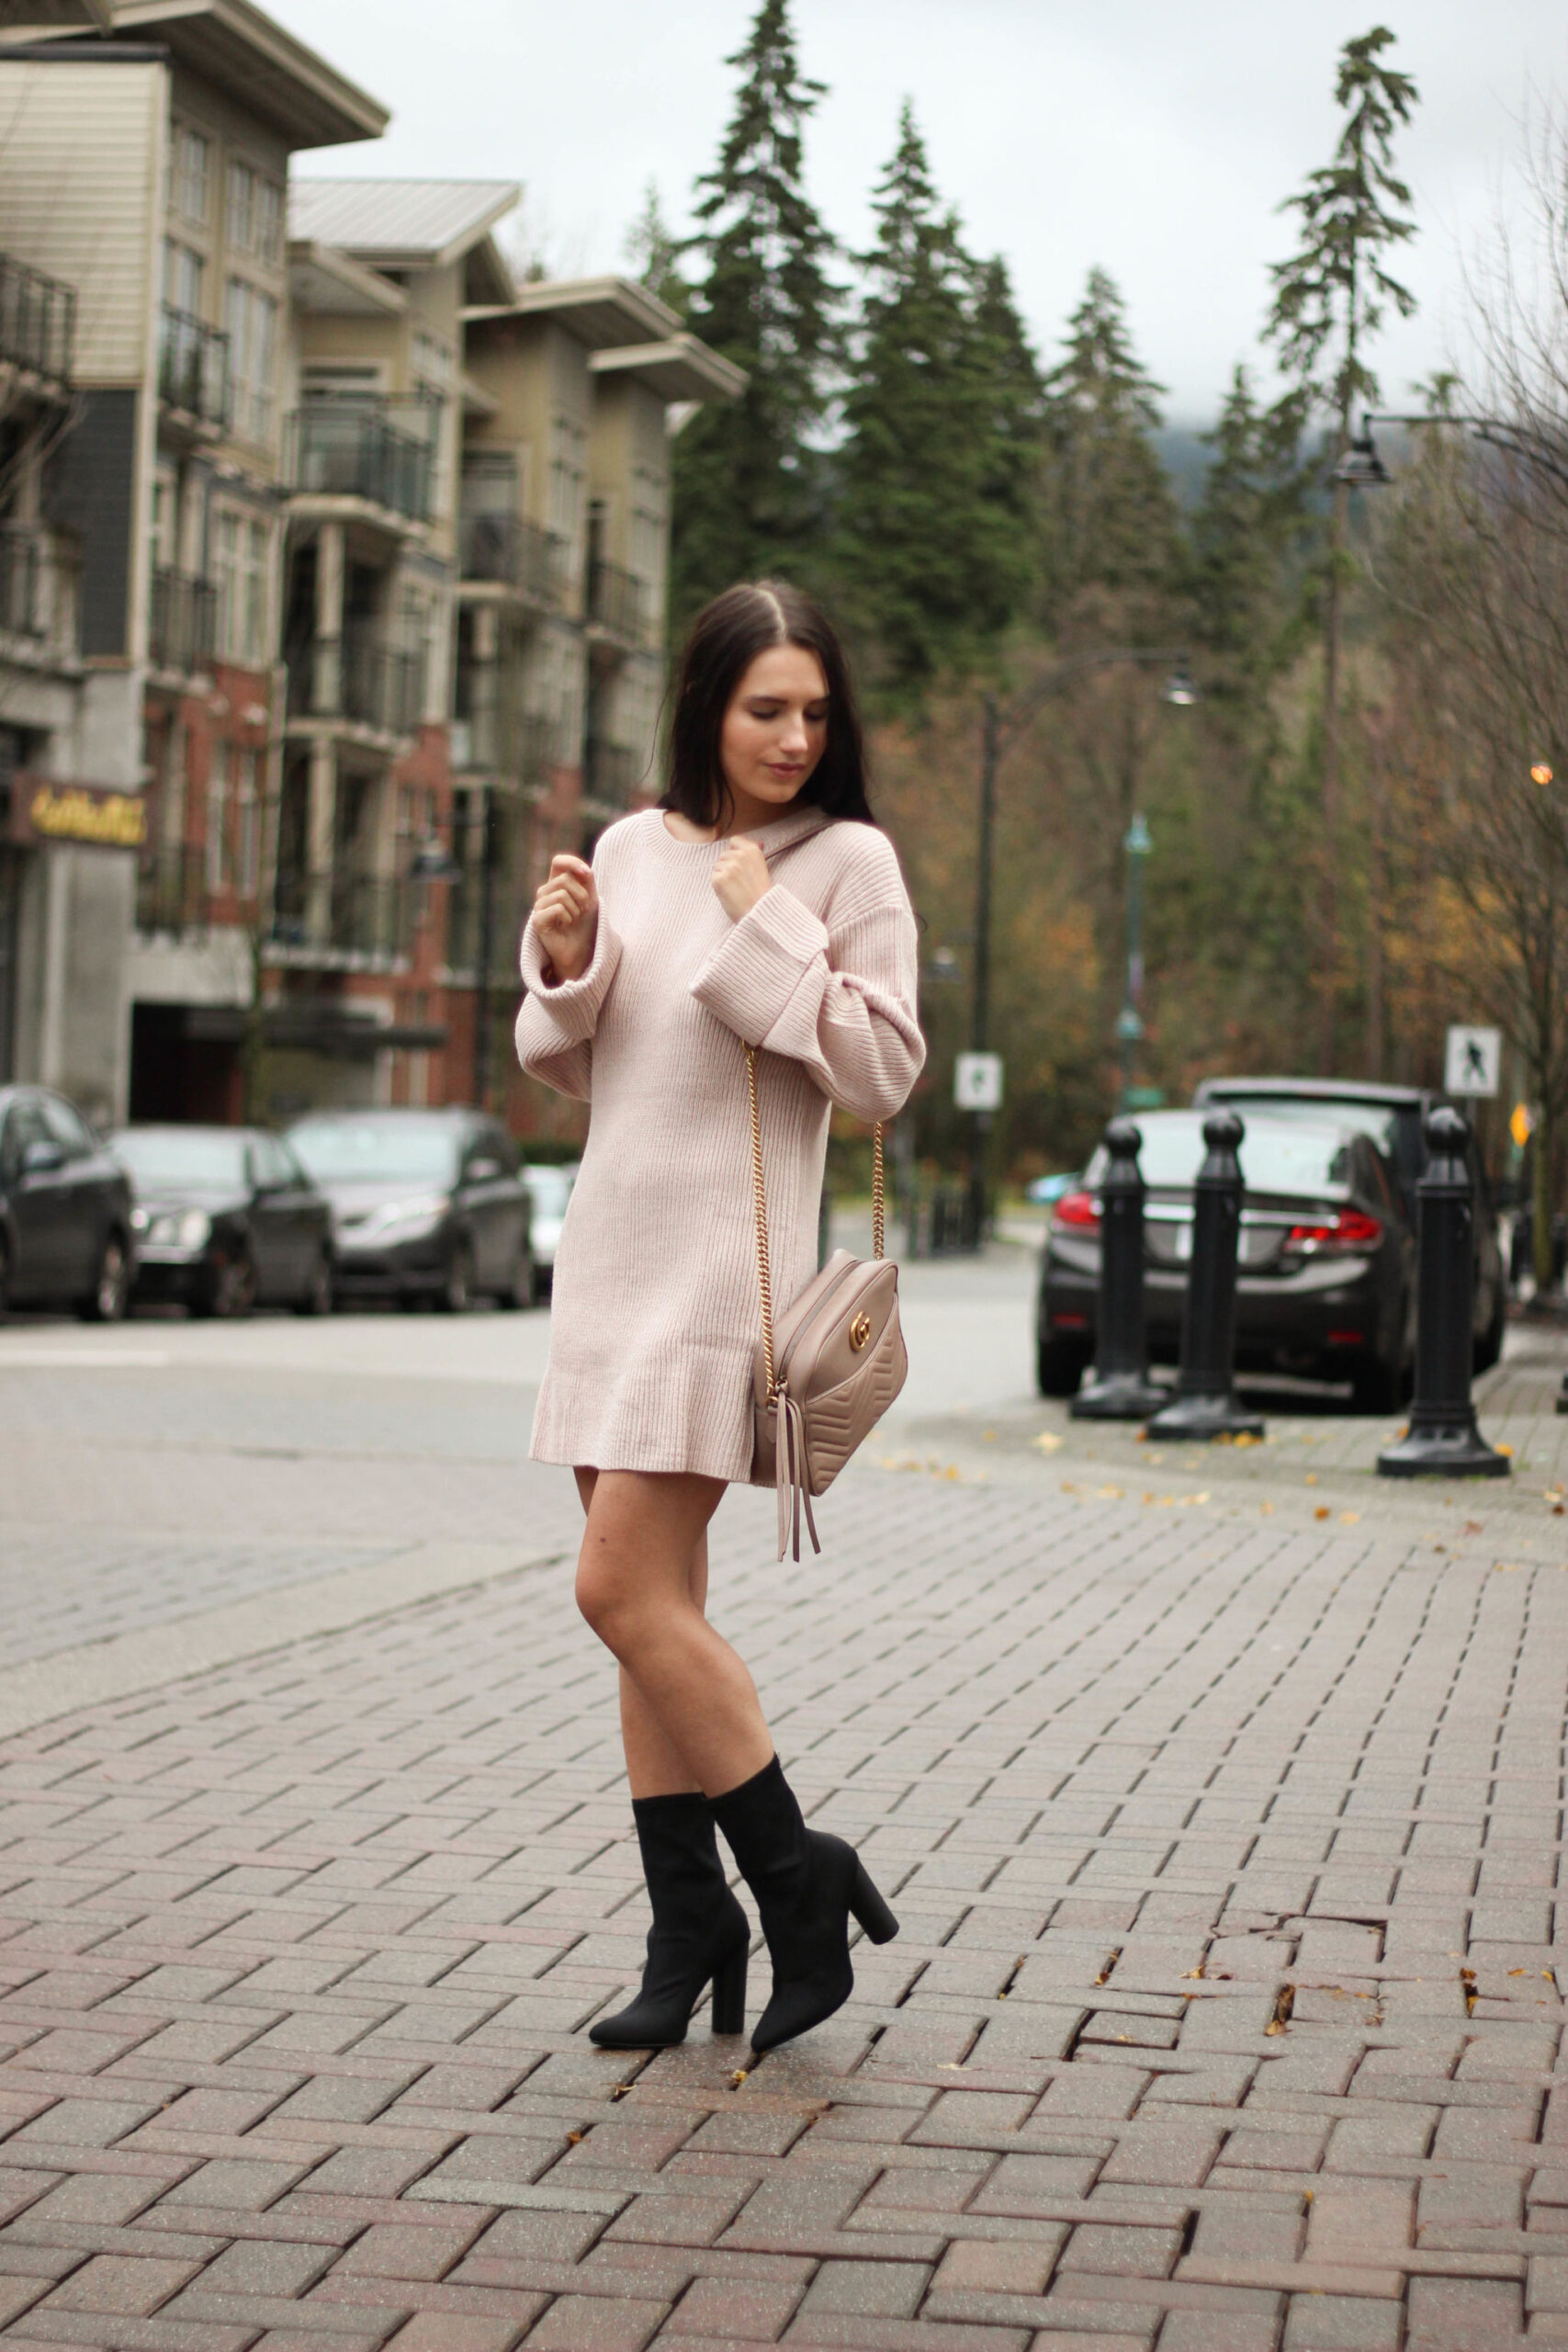 The Sweater Dress You Need this Winter